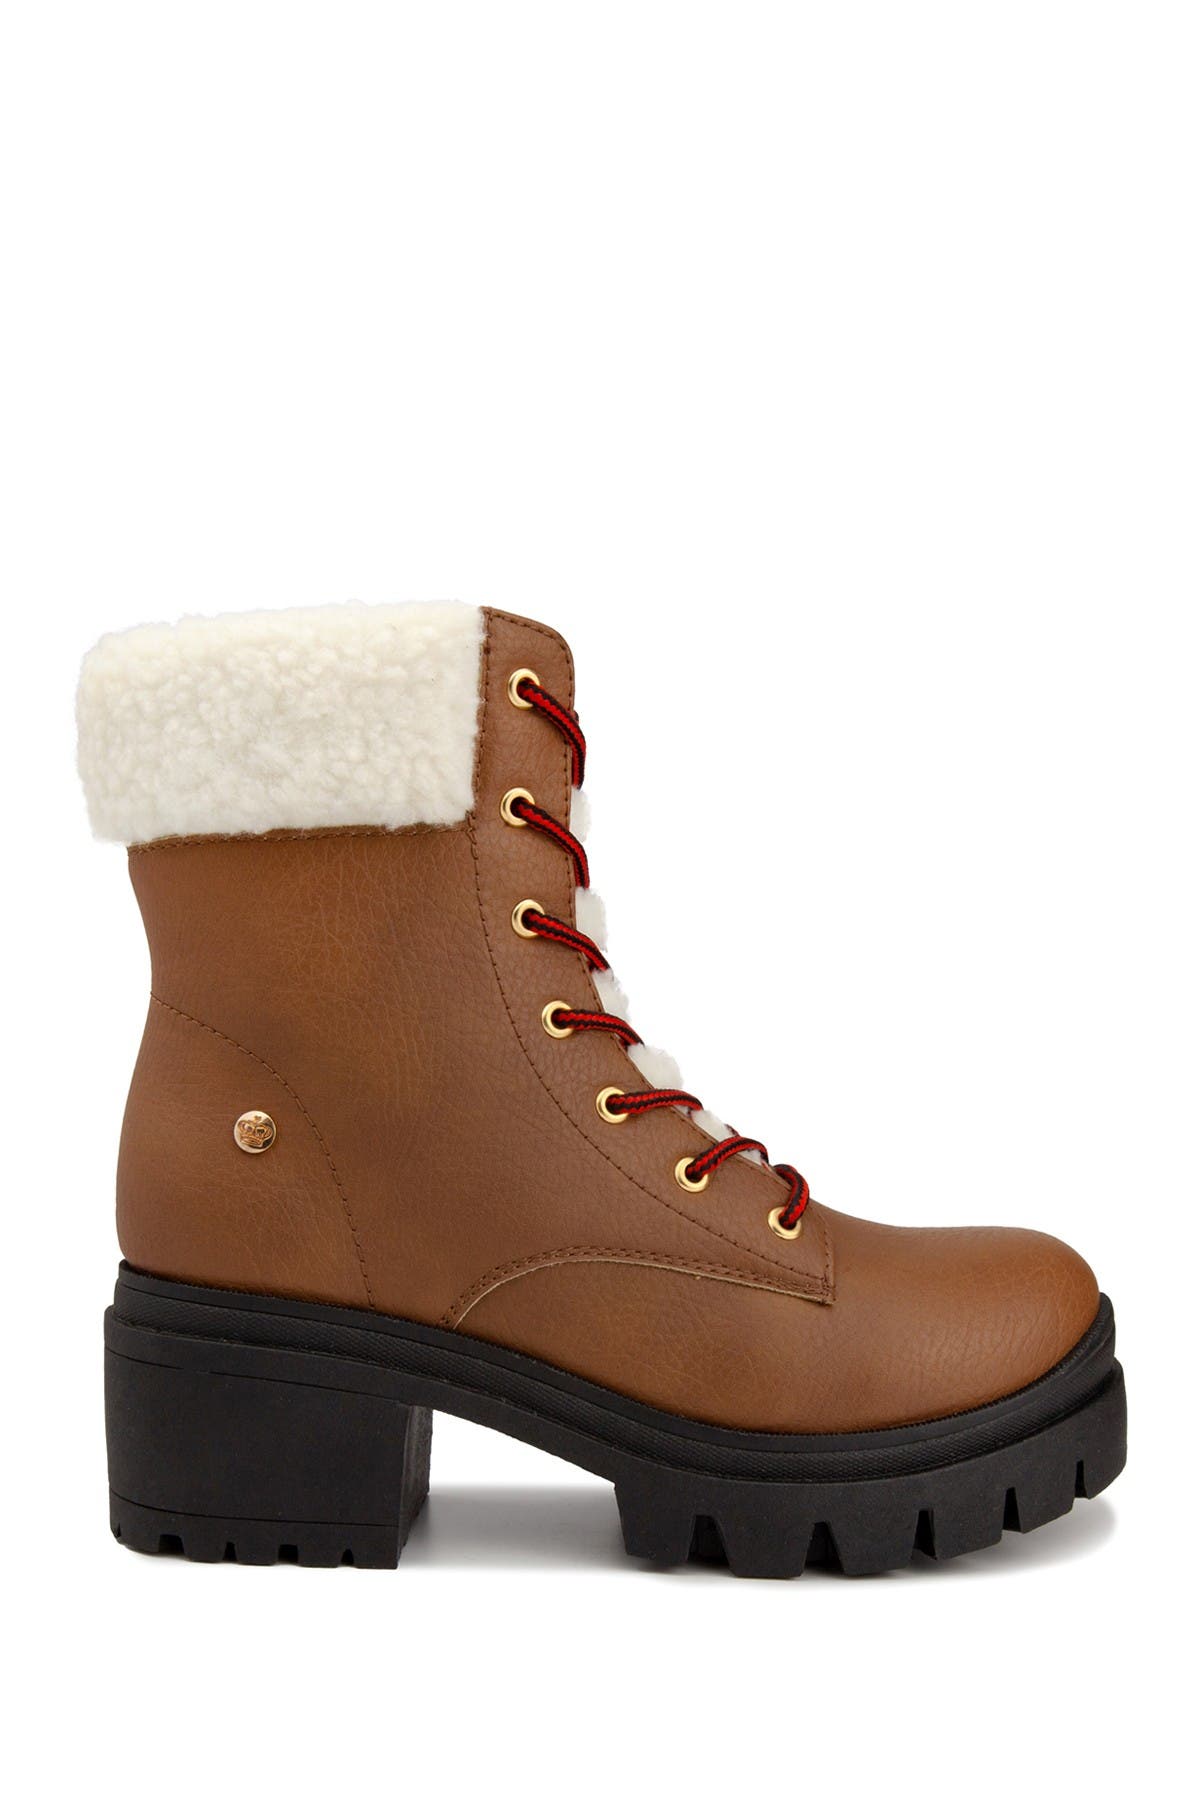 Juicy Couture Ceress Hiker Boot In Brown